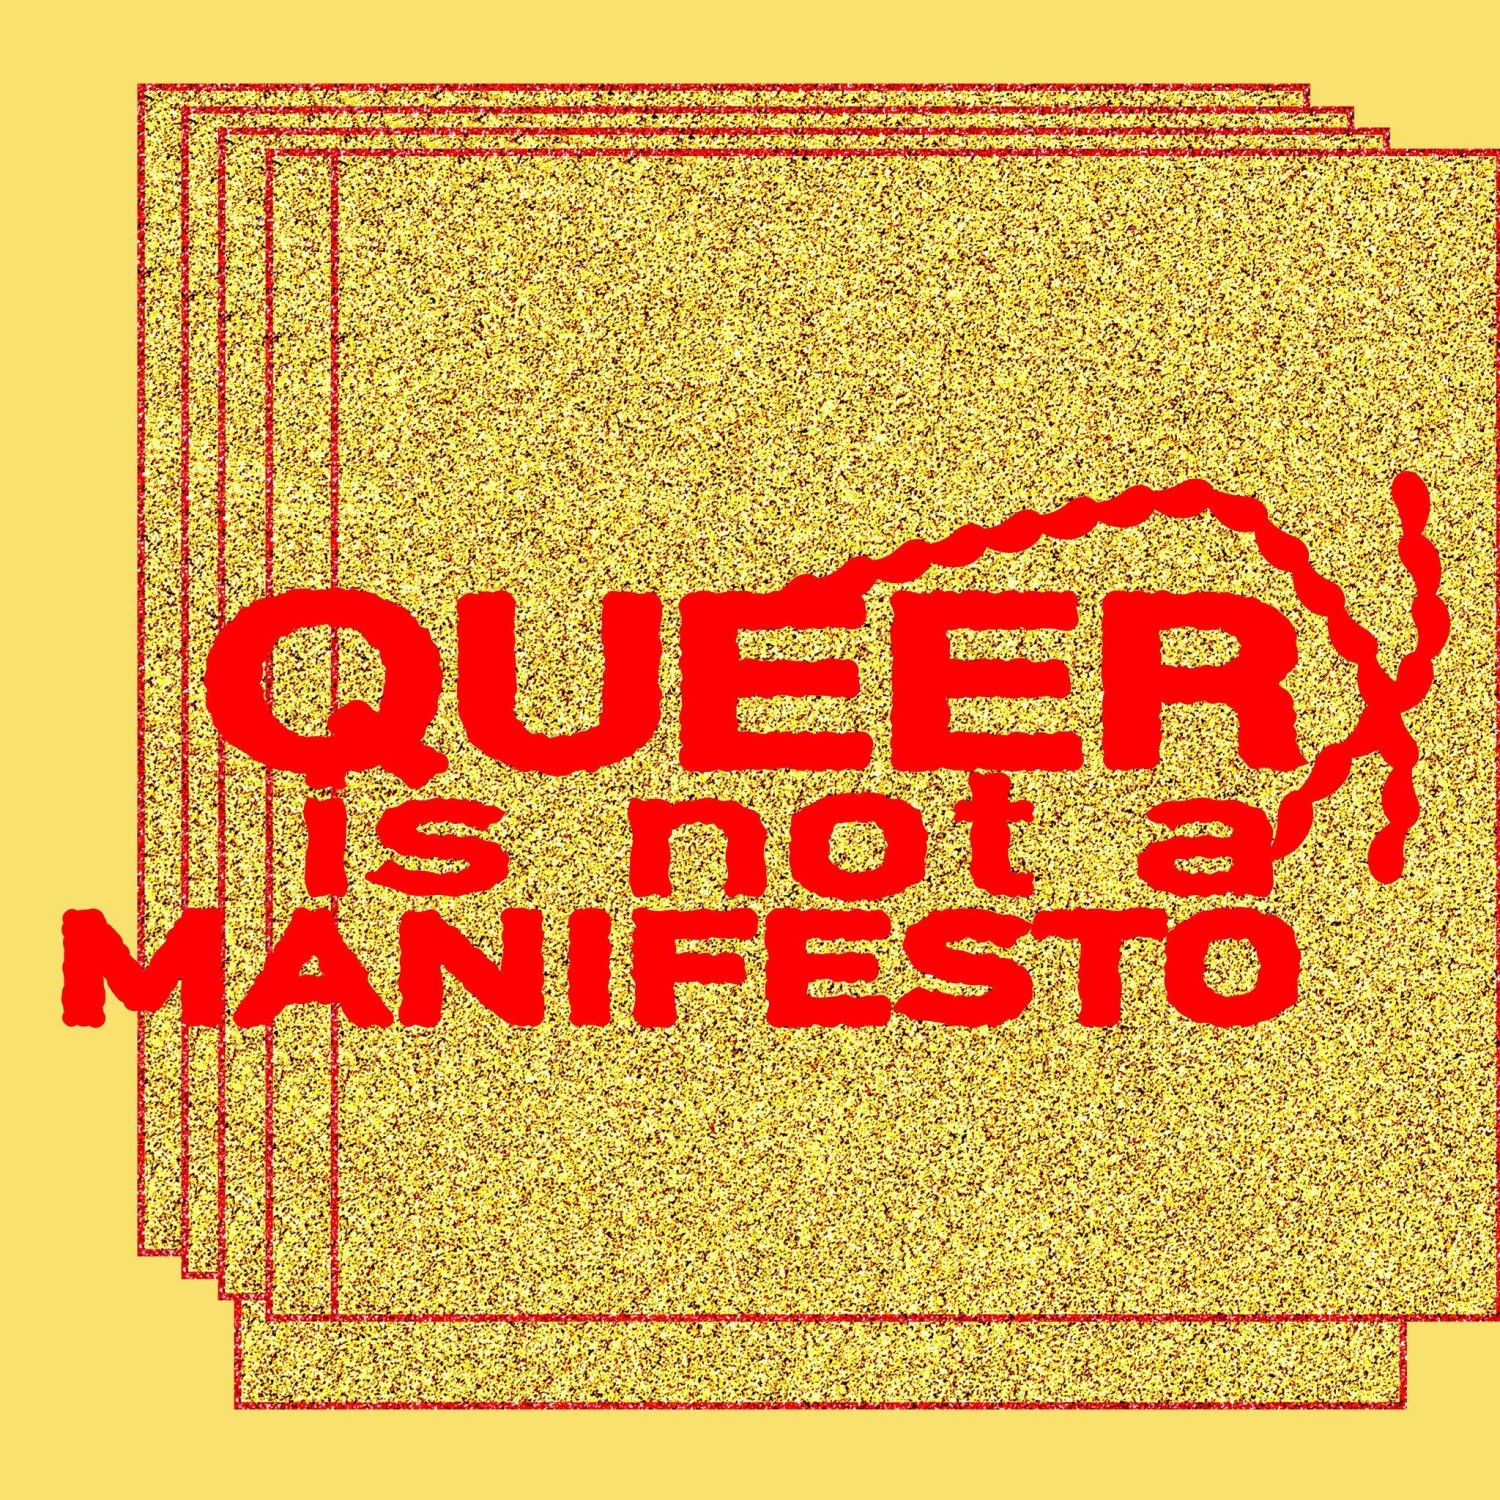 queer-is-not-a-manifesto-logo